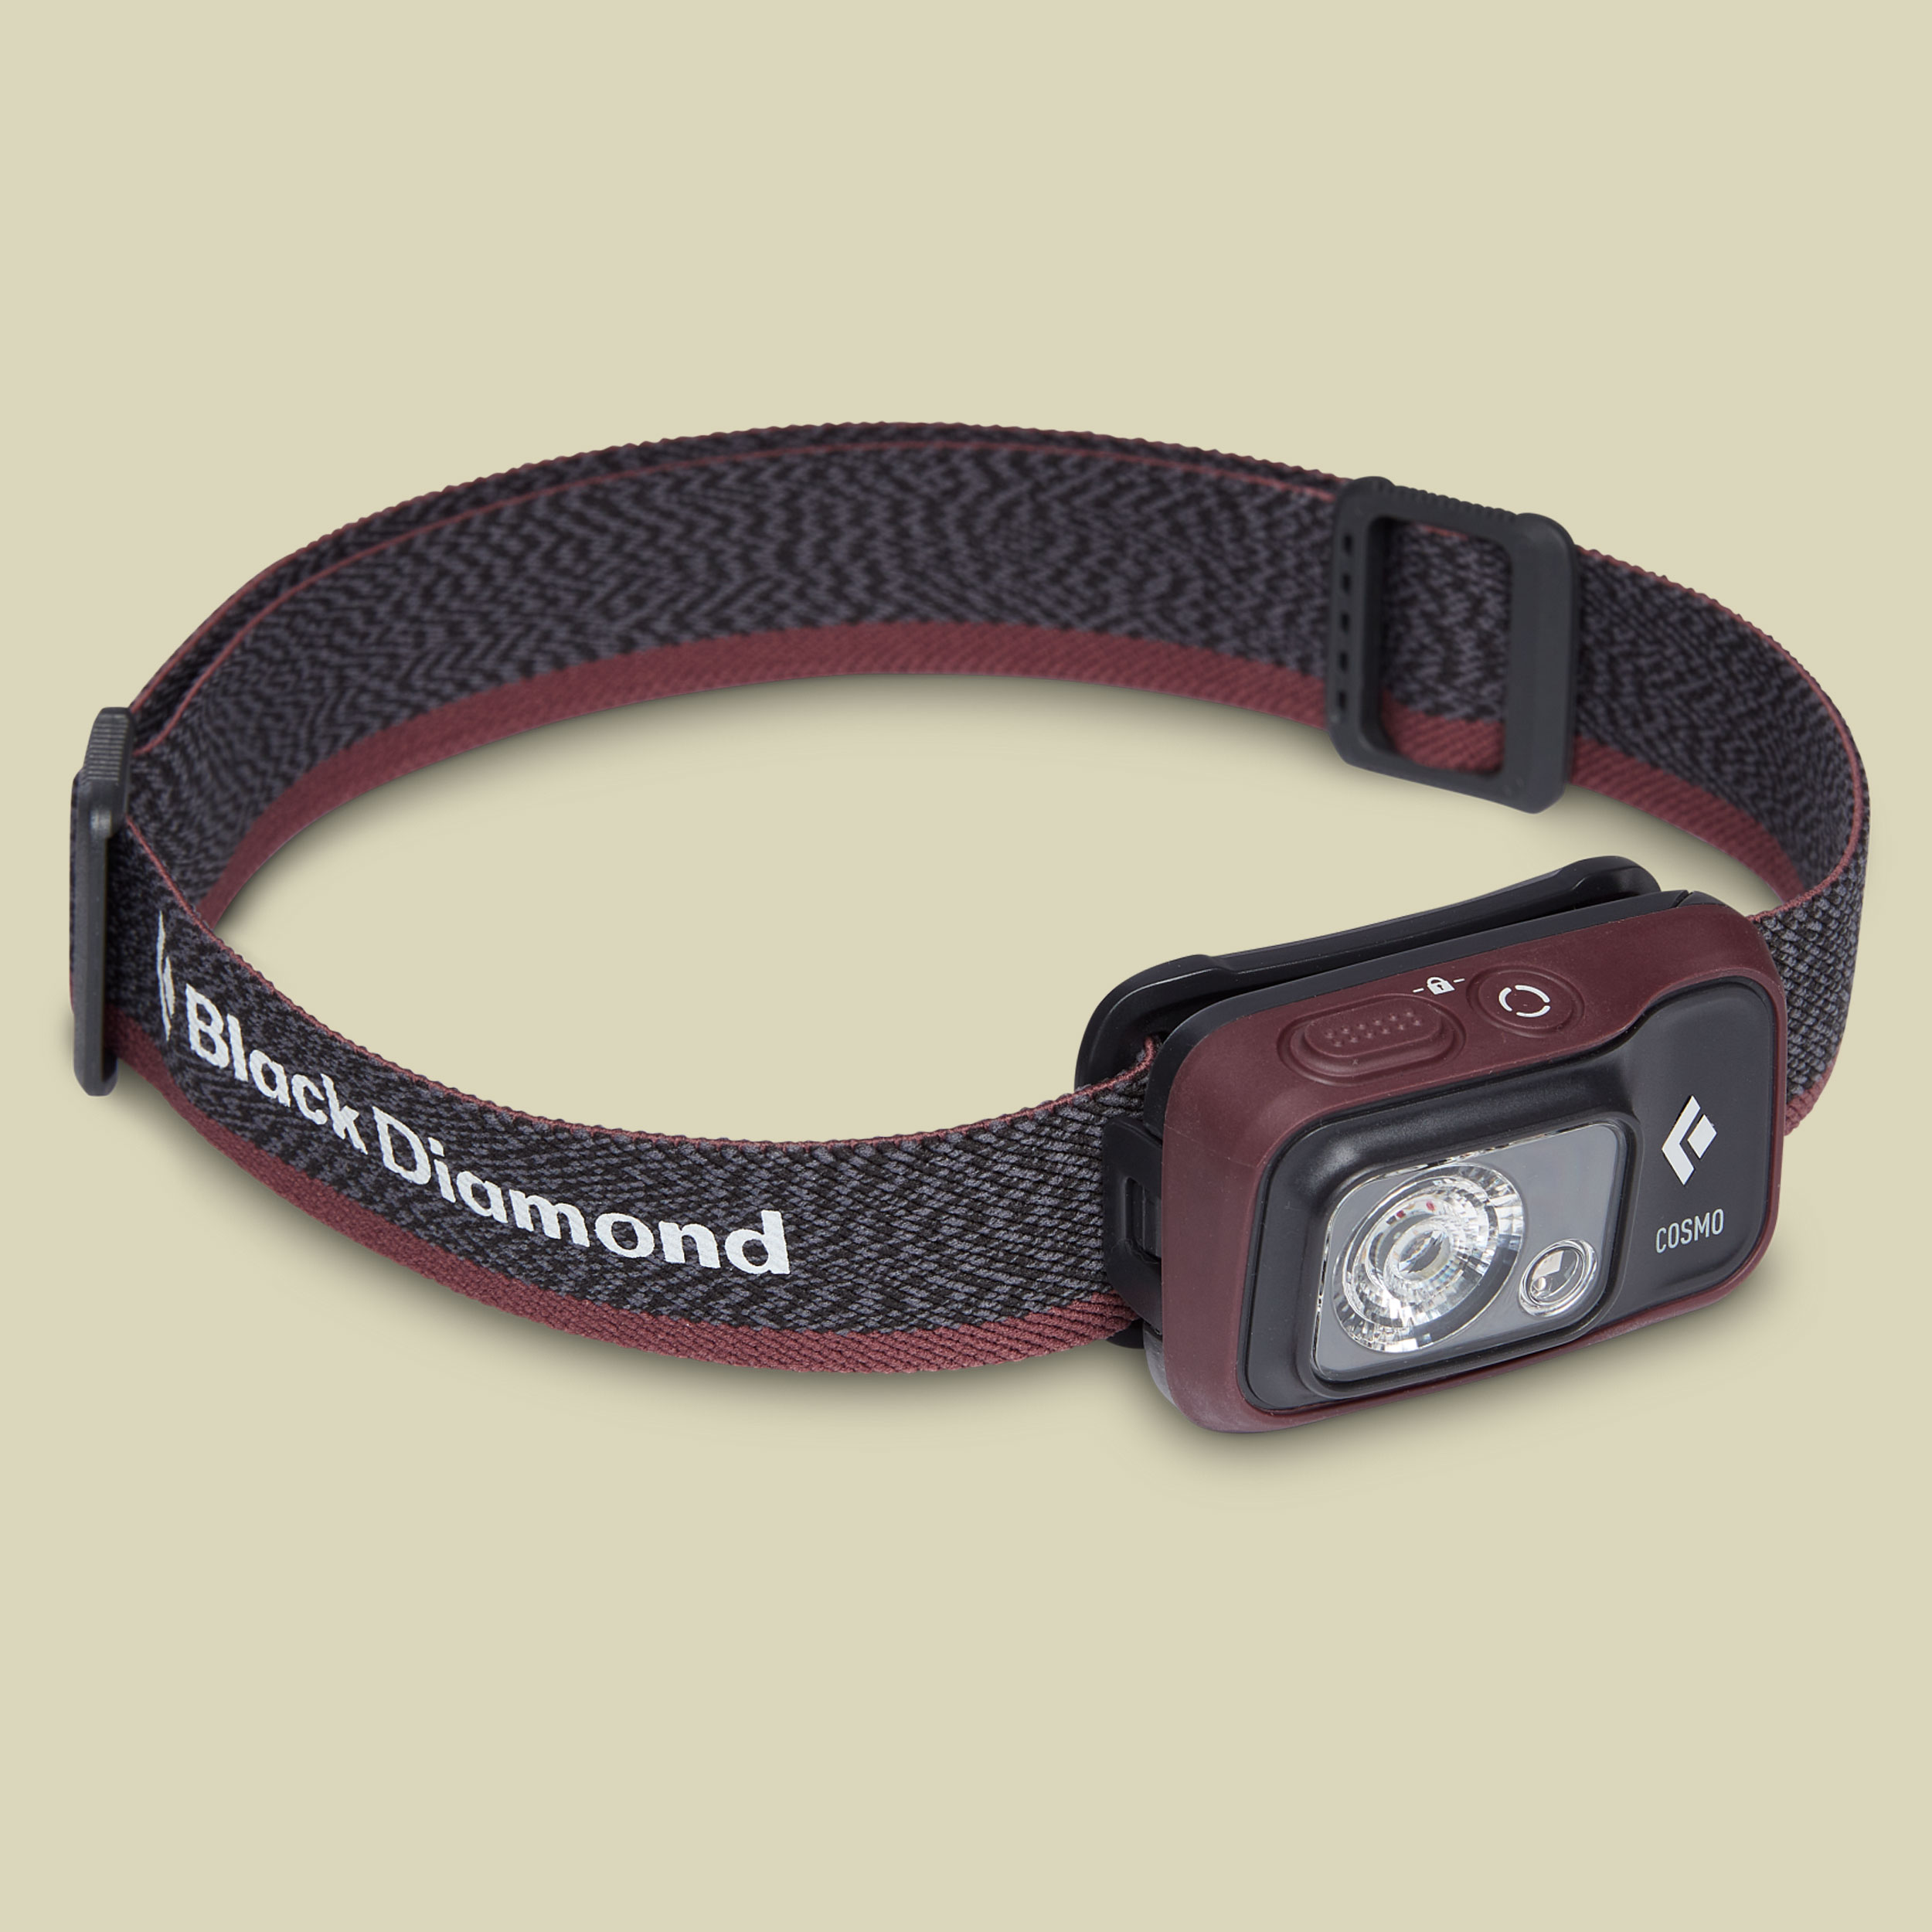 Cosmo 350 Headlamp Größe one size Farbe bordeaux